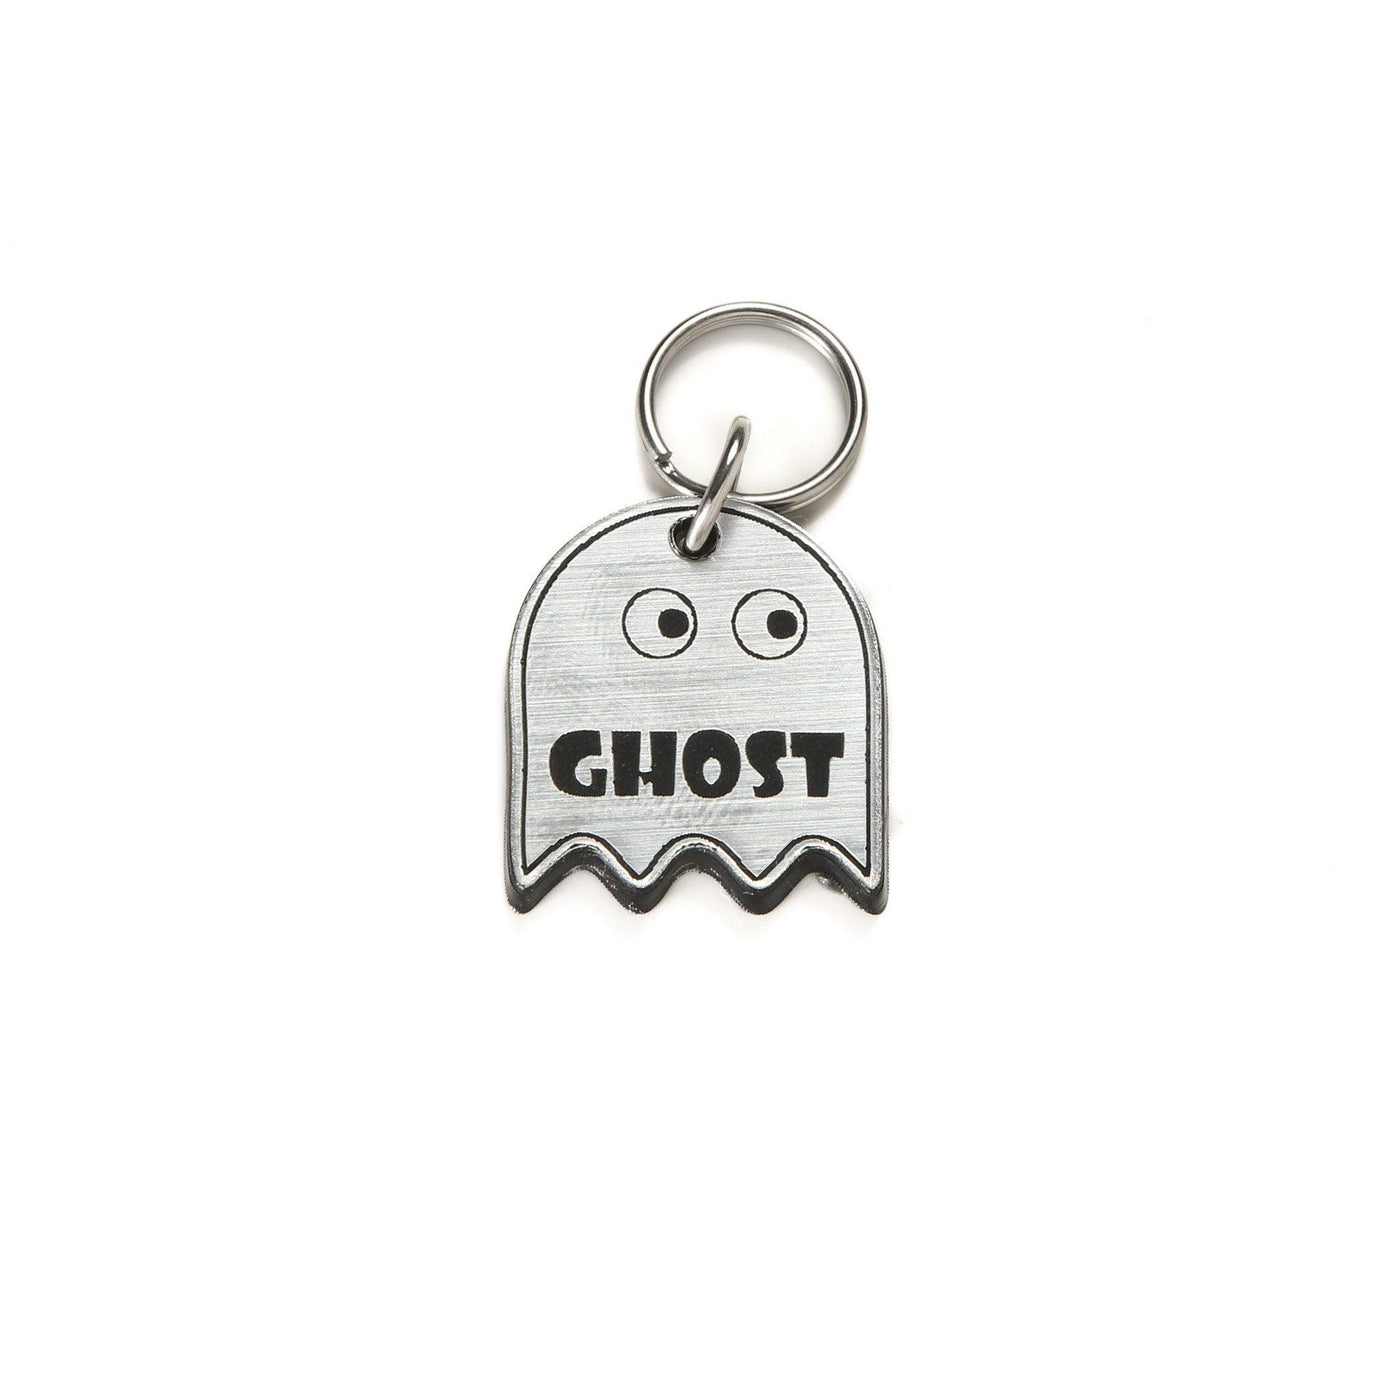 Personalized Ghost Pet Tag, Personalized Pet ID Tag, Spirit Friendly, Halloween Pet Tag, Witch Pet Tag, Spooky Pet Tag - Jones Creativity